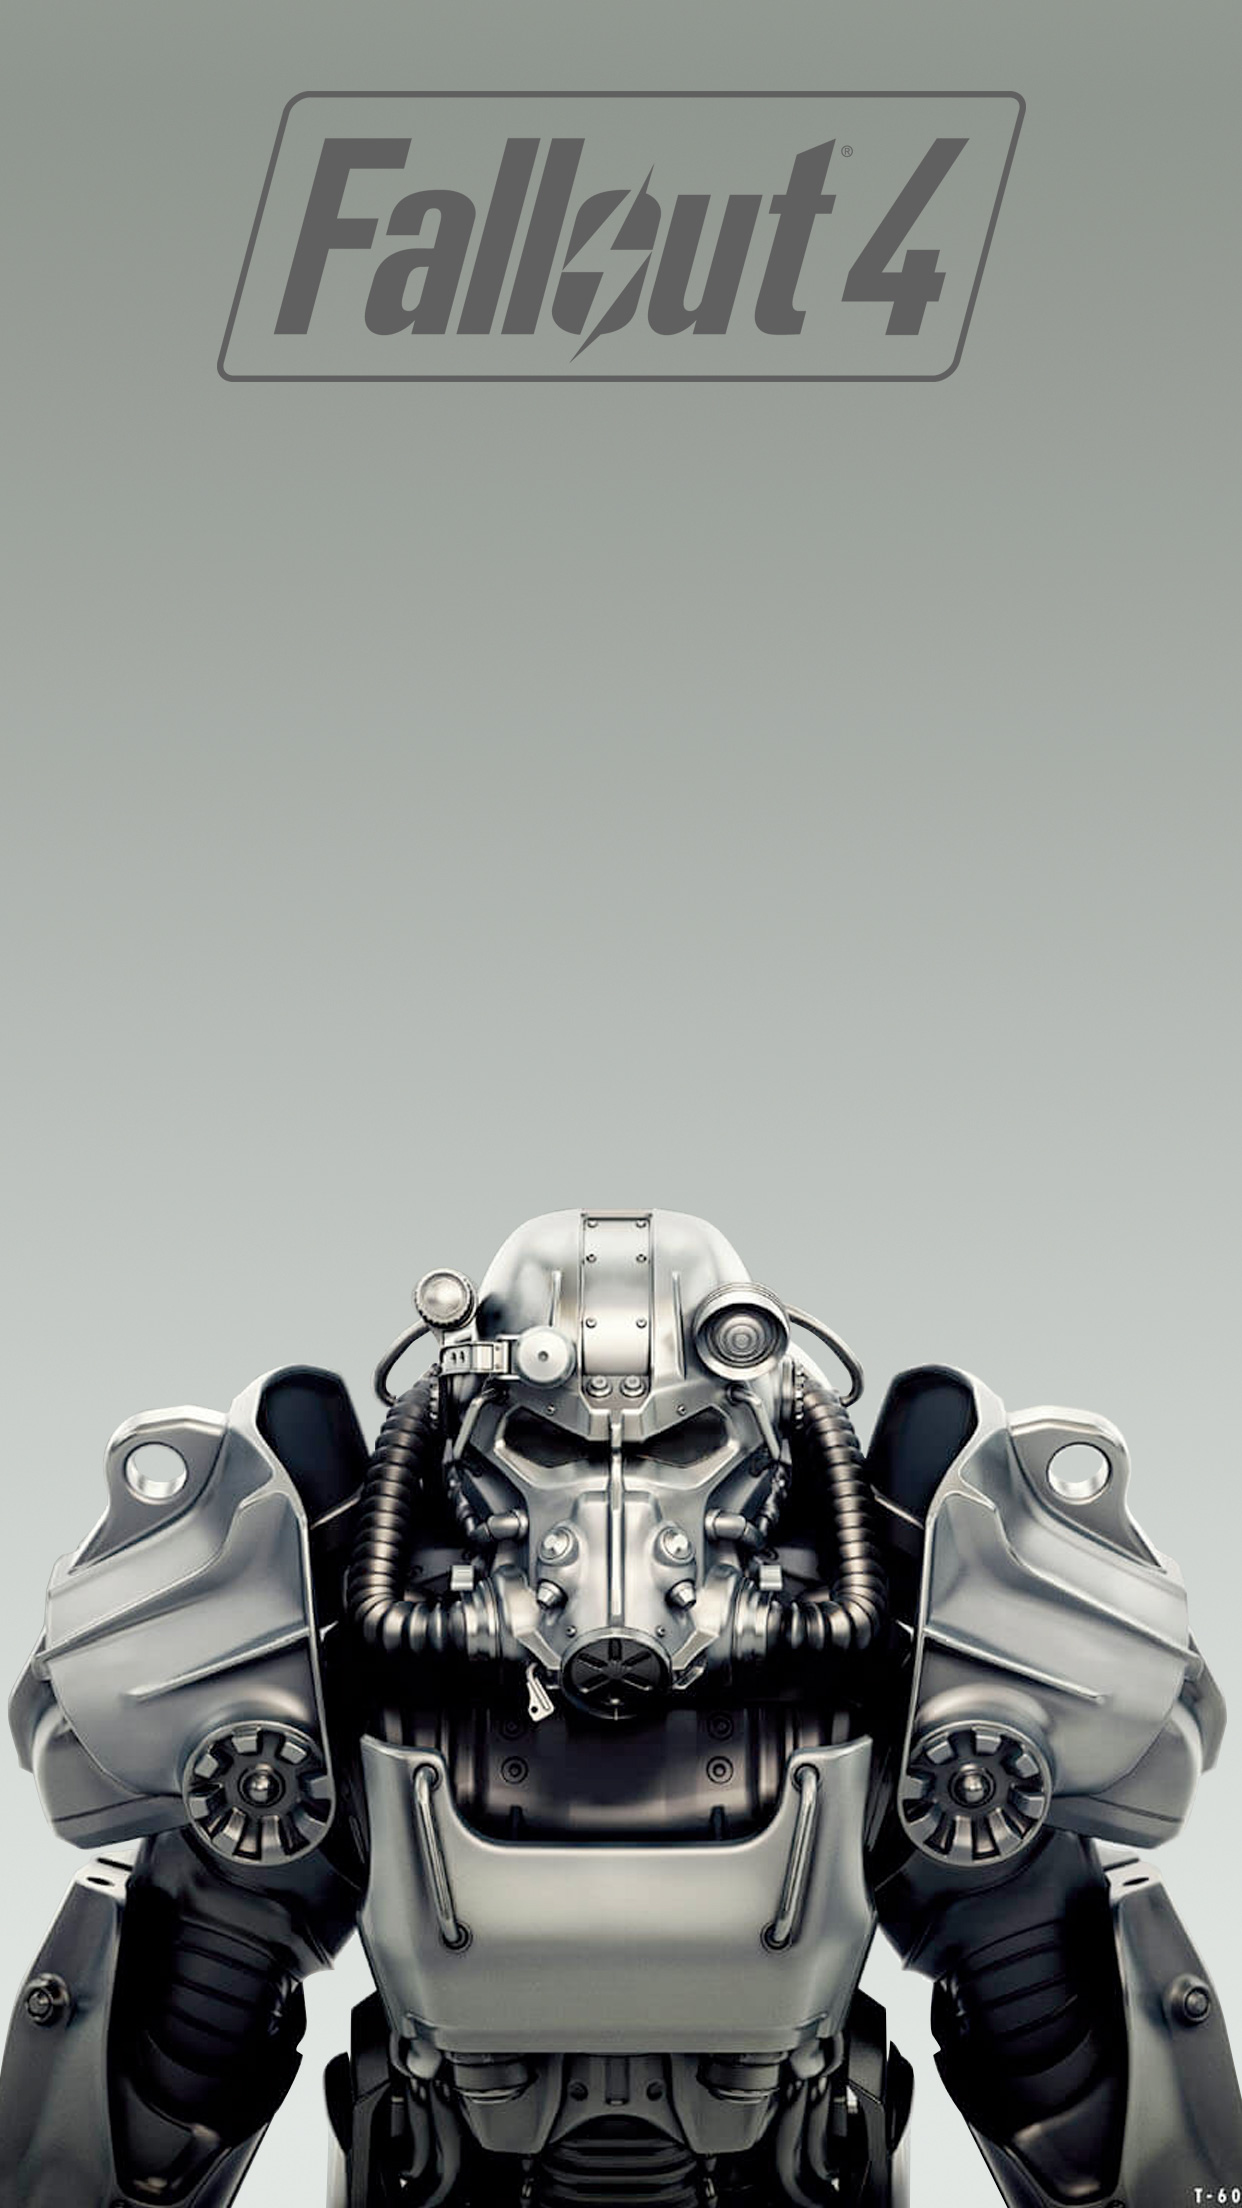 fallout 4 wallpaper,vehicle,auto part,motorcycle accessories,motorcycle,font